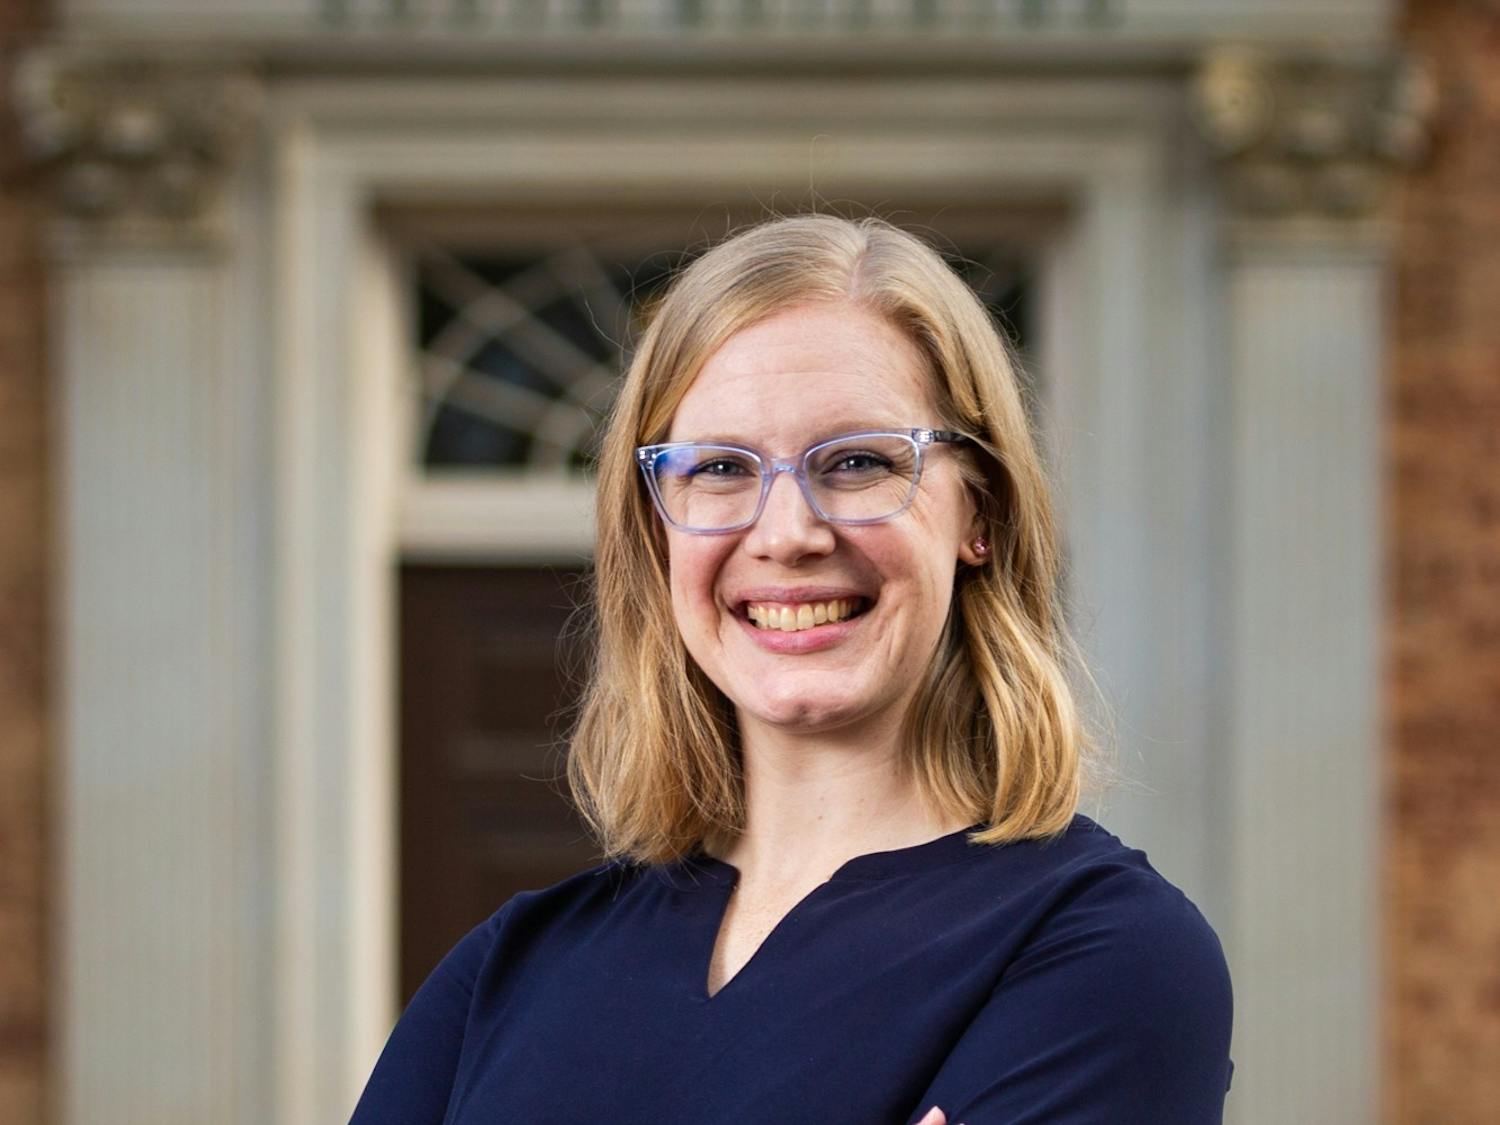 Lauren Hawkinson, president-elect of the Graduate and Professional Student Government, poses in front of the South Building in Chapel Hill, N.C. on Sunday, March 26, 2023.